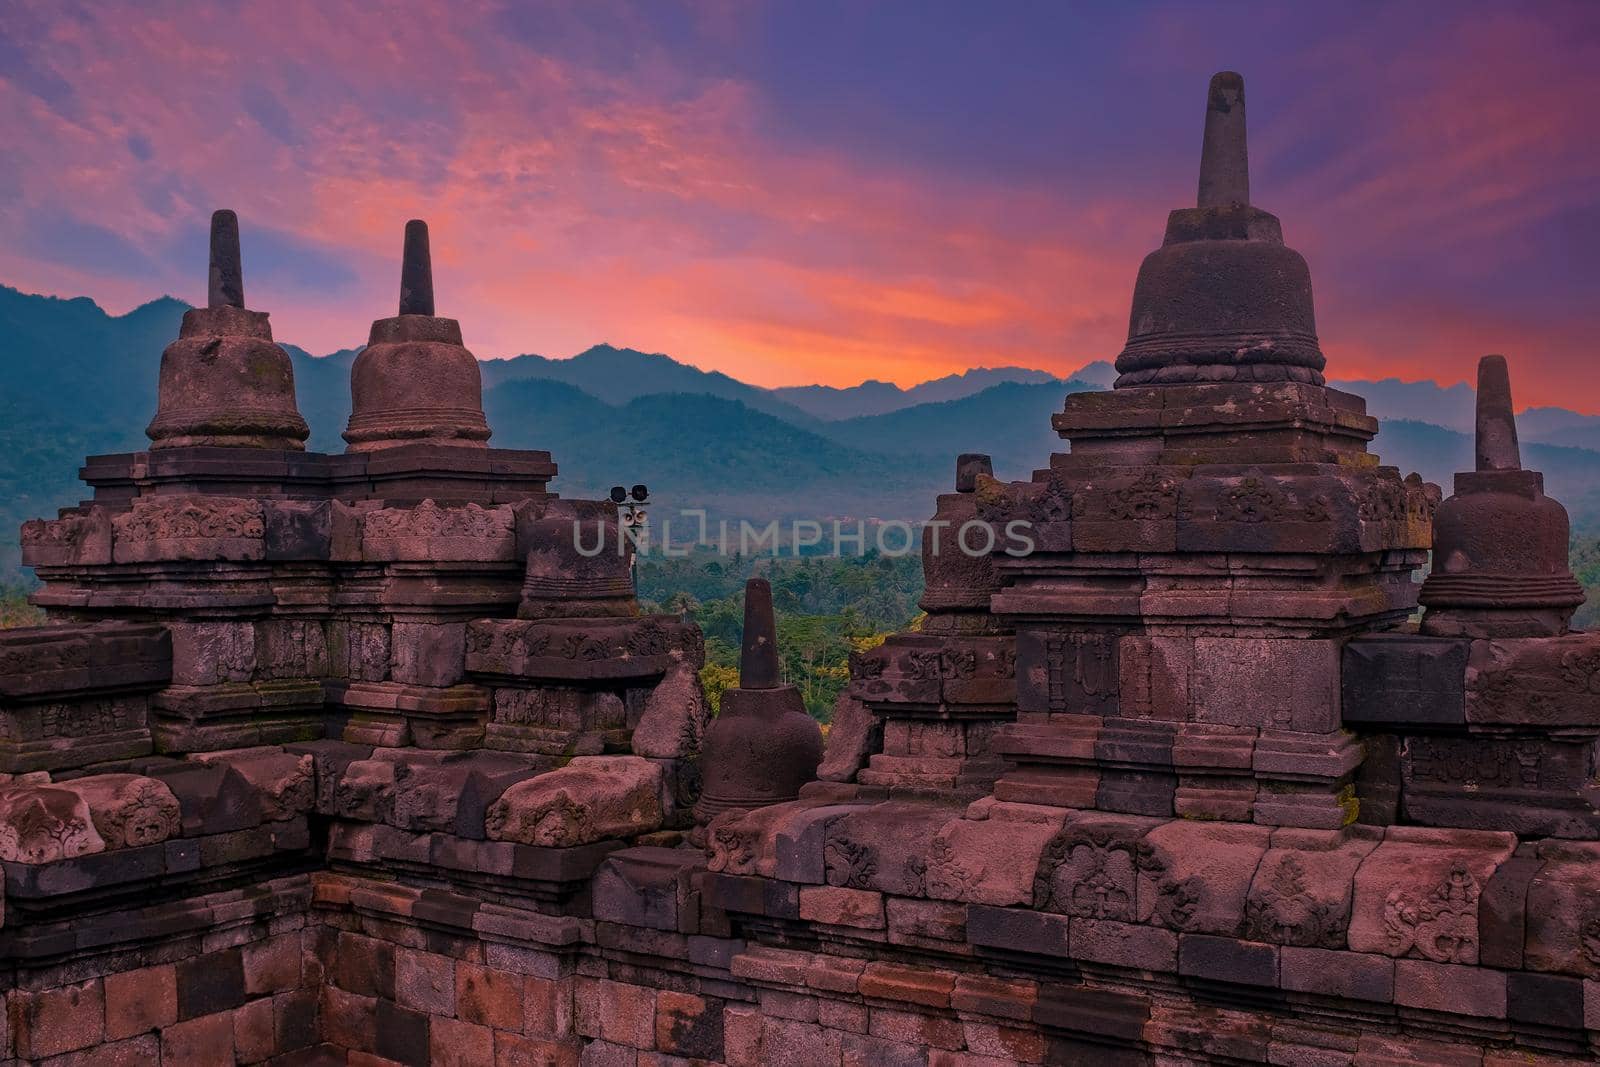 Borobudur Temple in Central Java in Indonesia. This famous Buddhist temple is dating from the 8th and 9th centuries at sunset